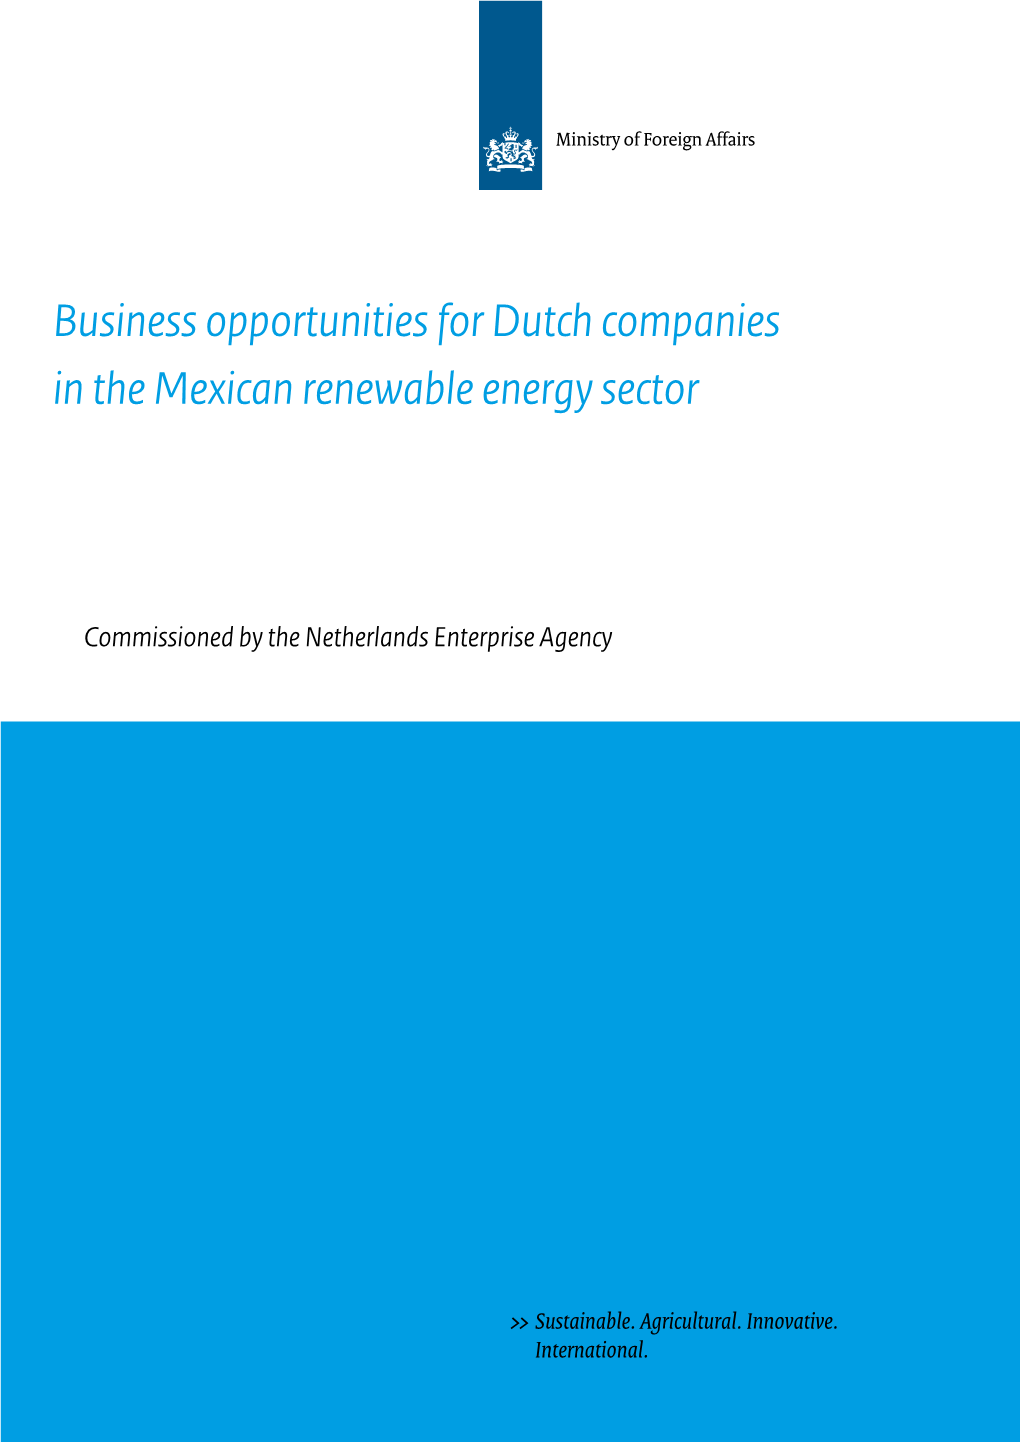 Business Opportunities for Dutch Companies in the Mexican Renewable Energy Sector